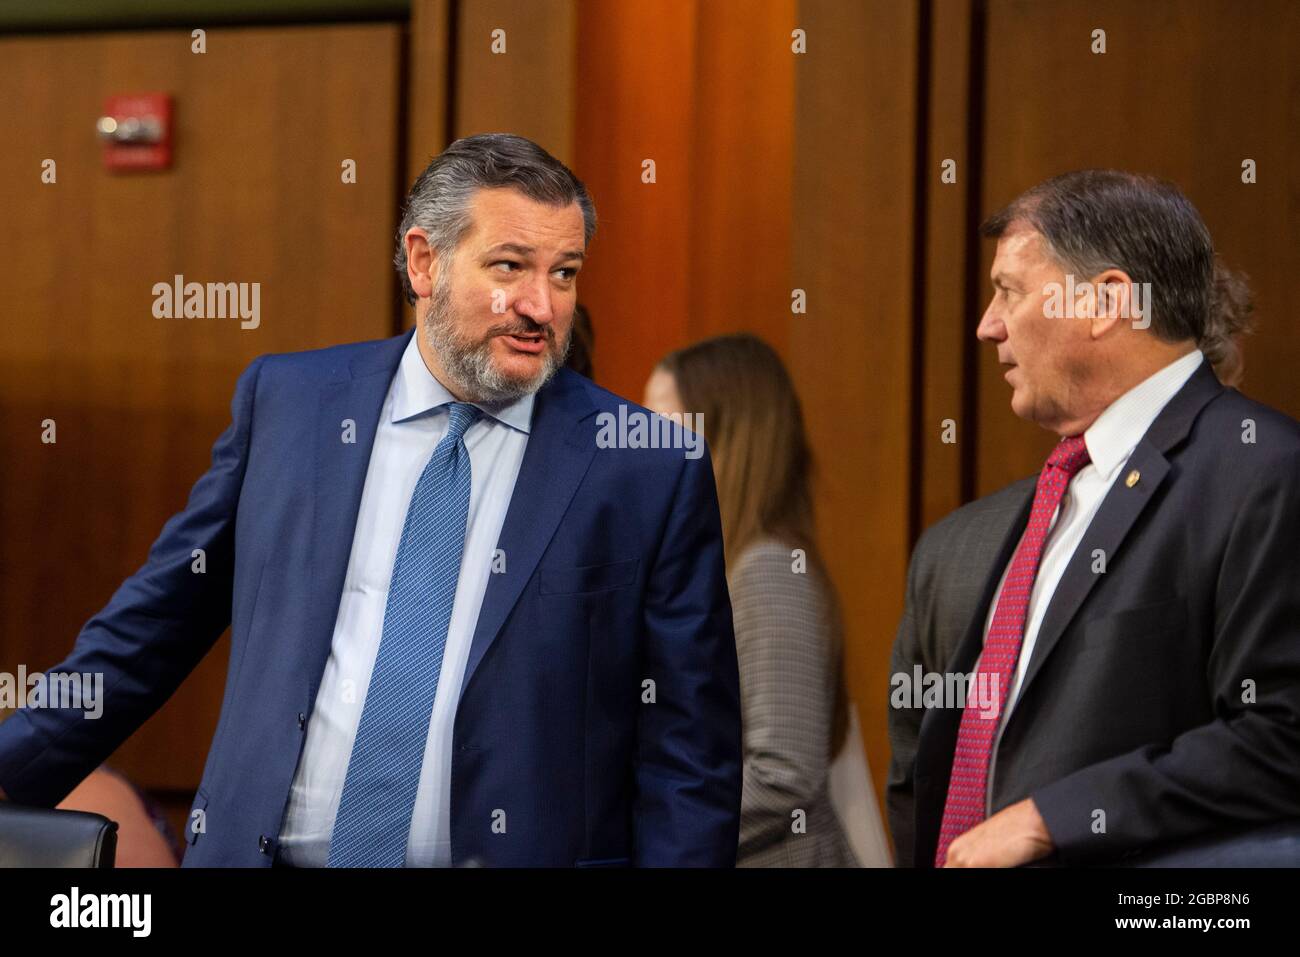 Washington, United States Of America. 04th Aug, 2021. United States Senator Ted Cruz (Republican of Texas), left, confers with United States Senator Mike Rounds (Republican of South Dakota), right, during a Senate Committee on Foreign Relations business meeting for nominations and legislative considerations in the Hart Senate Office Building in Washington, DC, Wednesday, August 4, 2021. Credit: Rod Lamkey/CNP/Sipa USA Credit: Sipa USA/Alamy Live News Stock Photo